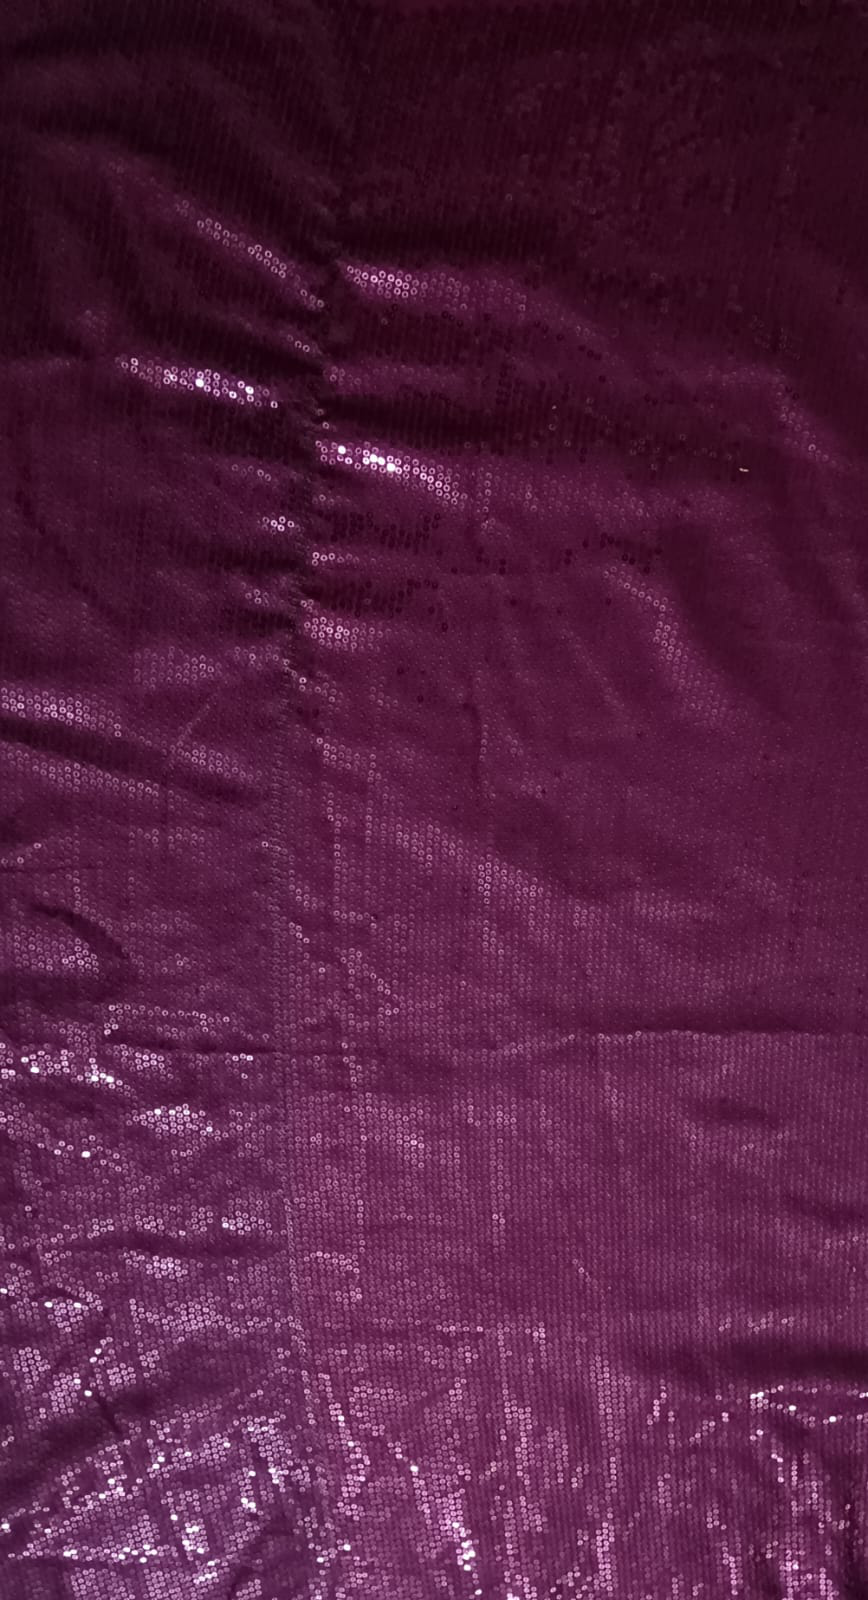 Fabric_Sequins_Violet.png